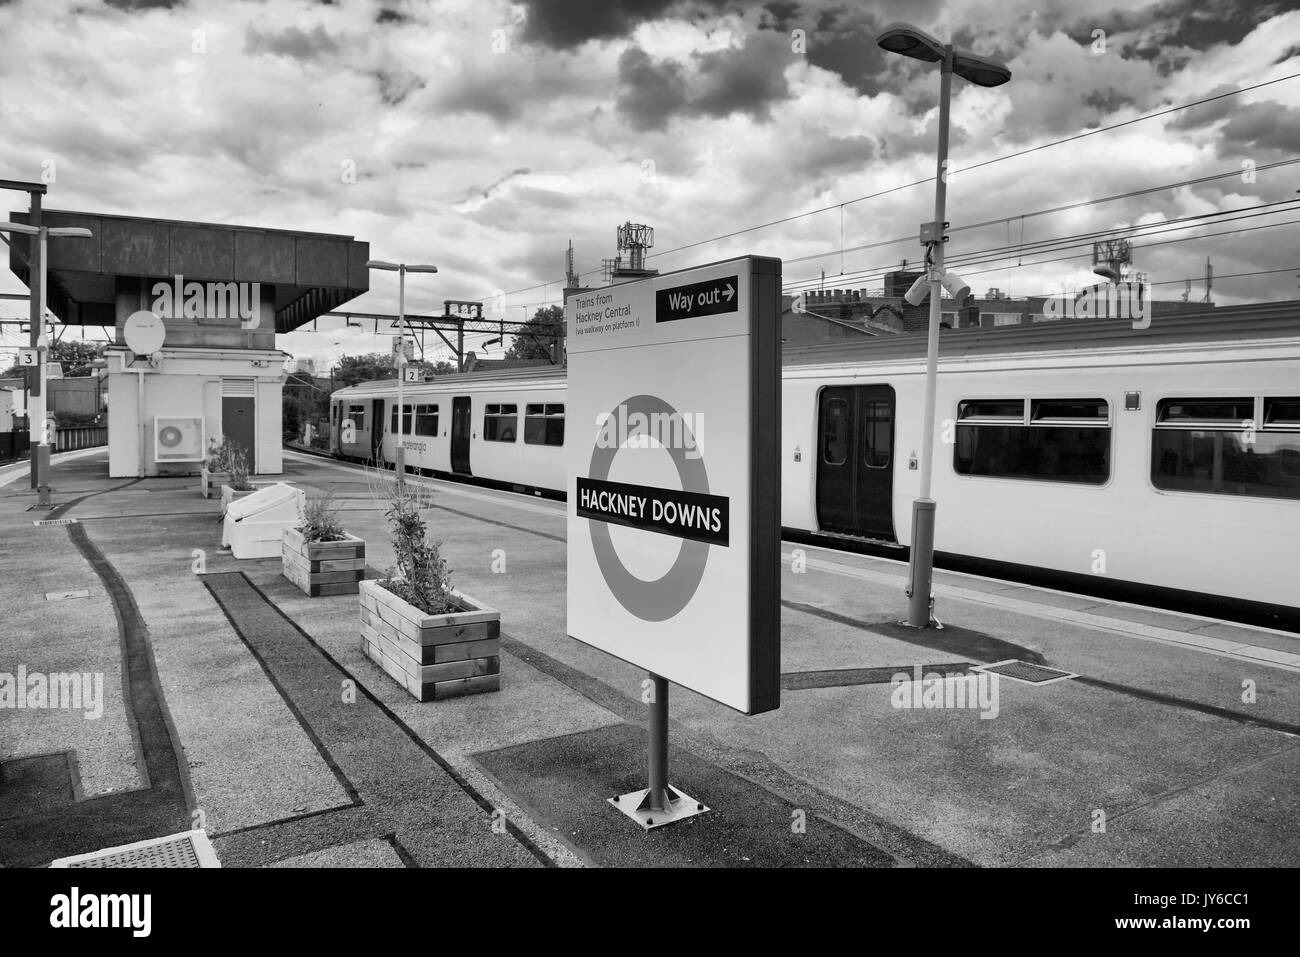 Greater Anglia train at Hackney Downs railway station in London Stock Photo